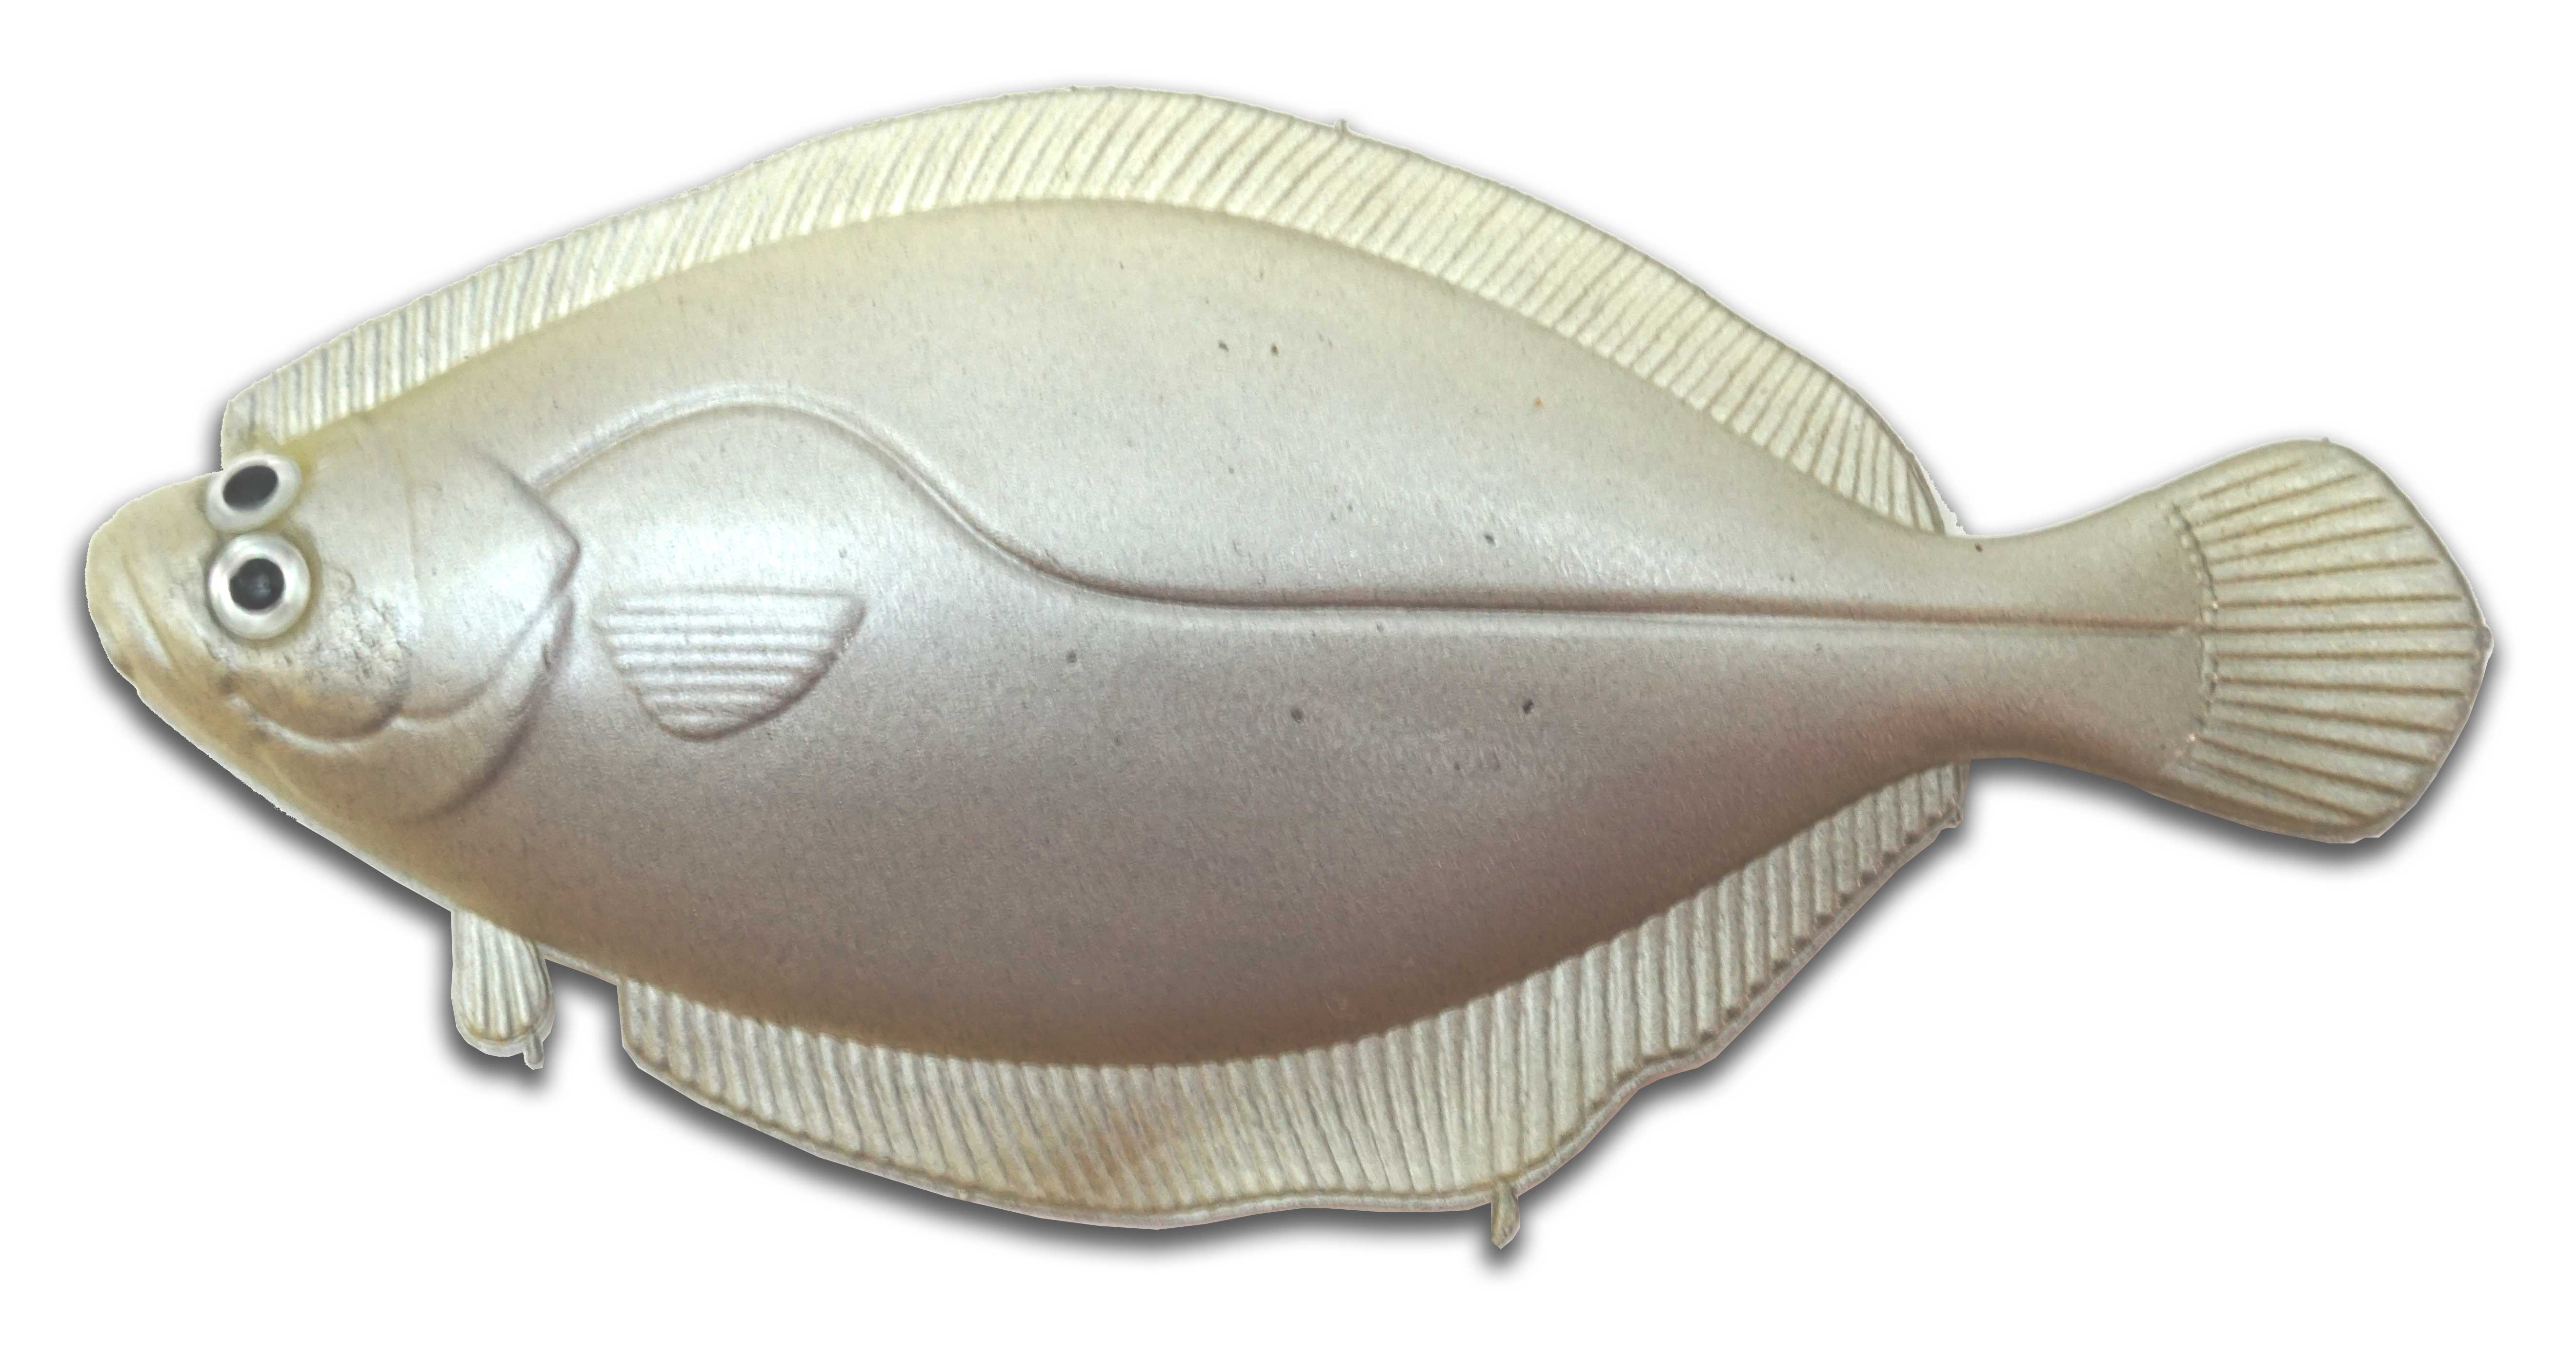 Artificial Flounder 5" Light Gray - Almost Alive Lures